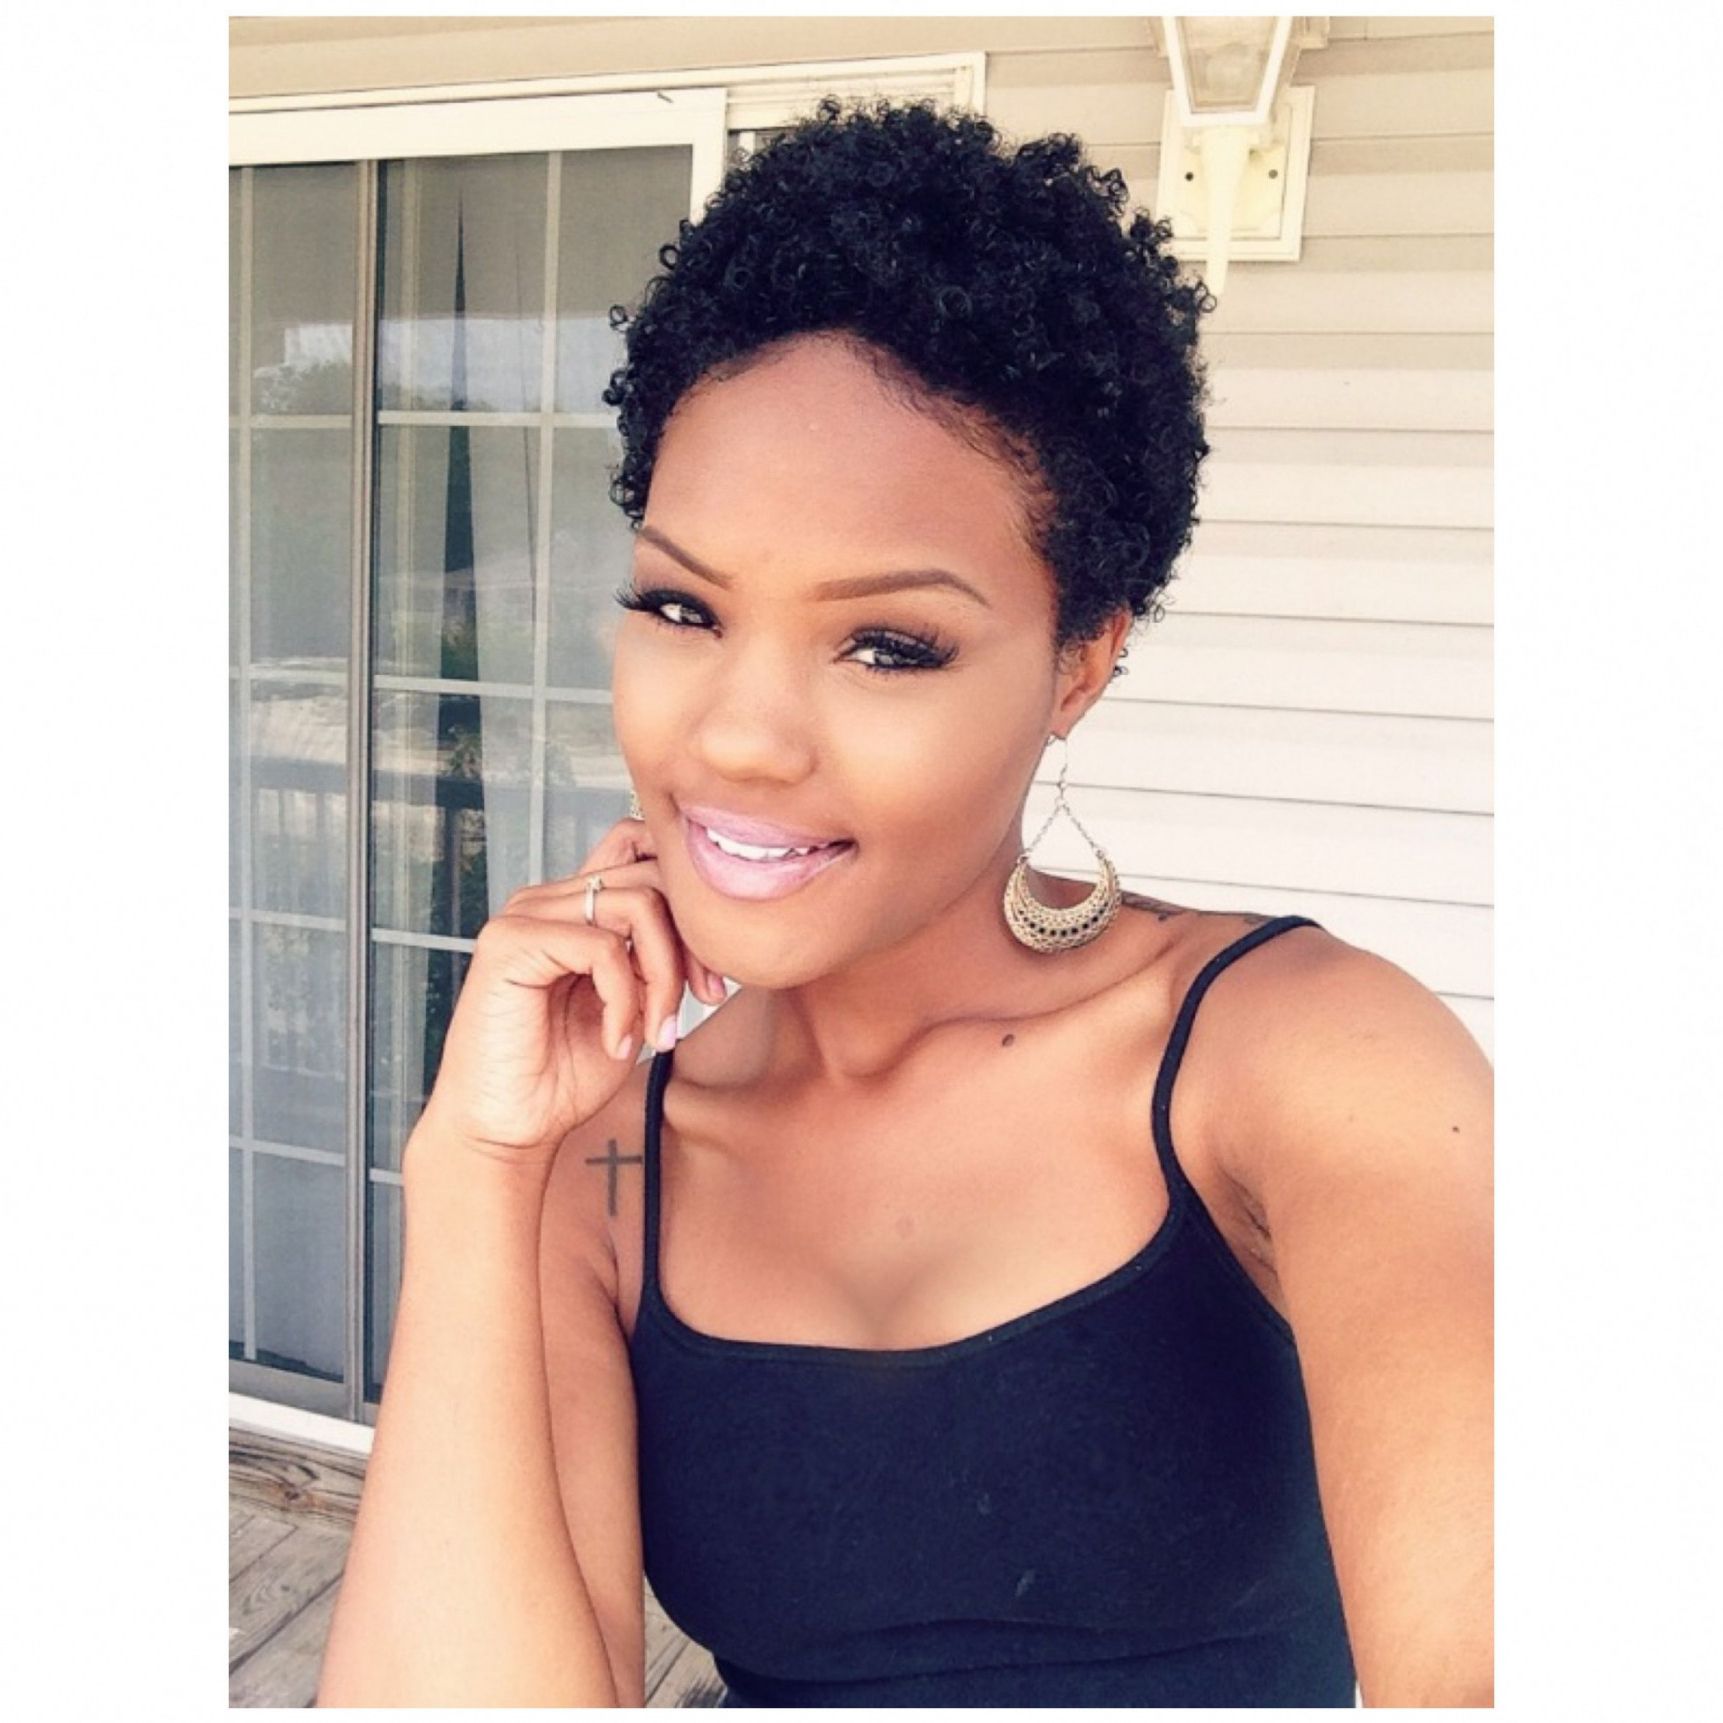 Short Super Curly Hairstyles Black Hair 2018 – Twelveminutemuse Within Super Short Hairstyles For Black Women (View 18 of 25)